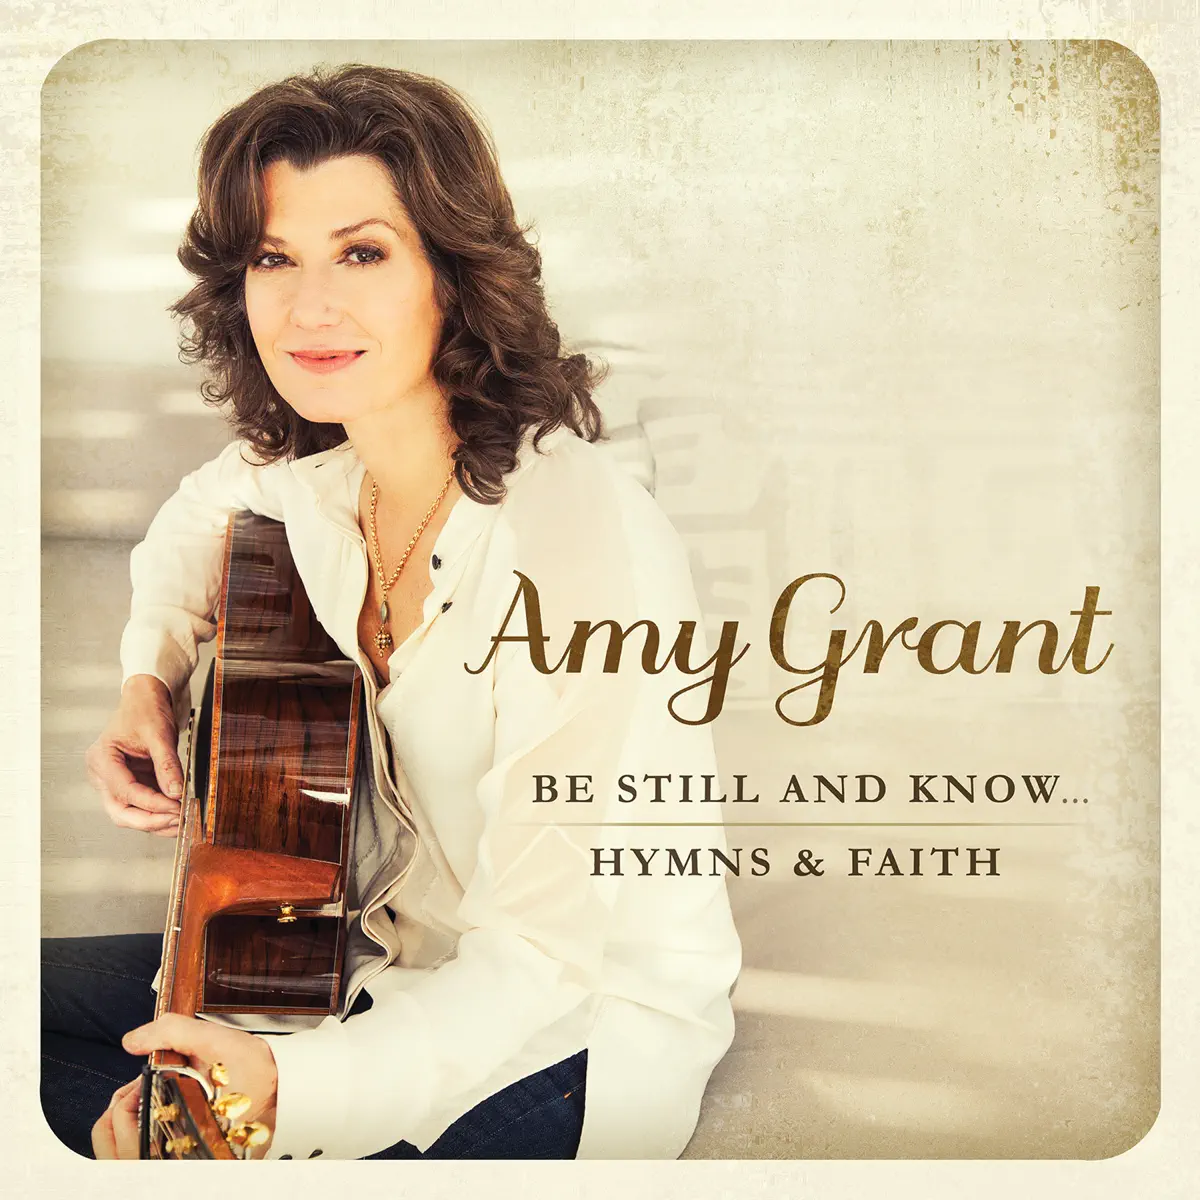 Amy Grant - Be Still and Know... Hymns & Faith (2015) [iTunes Plus AAC M4A]-新房子